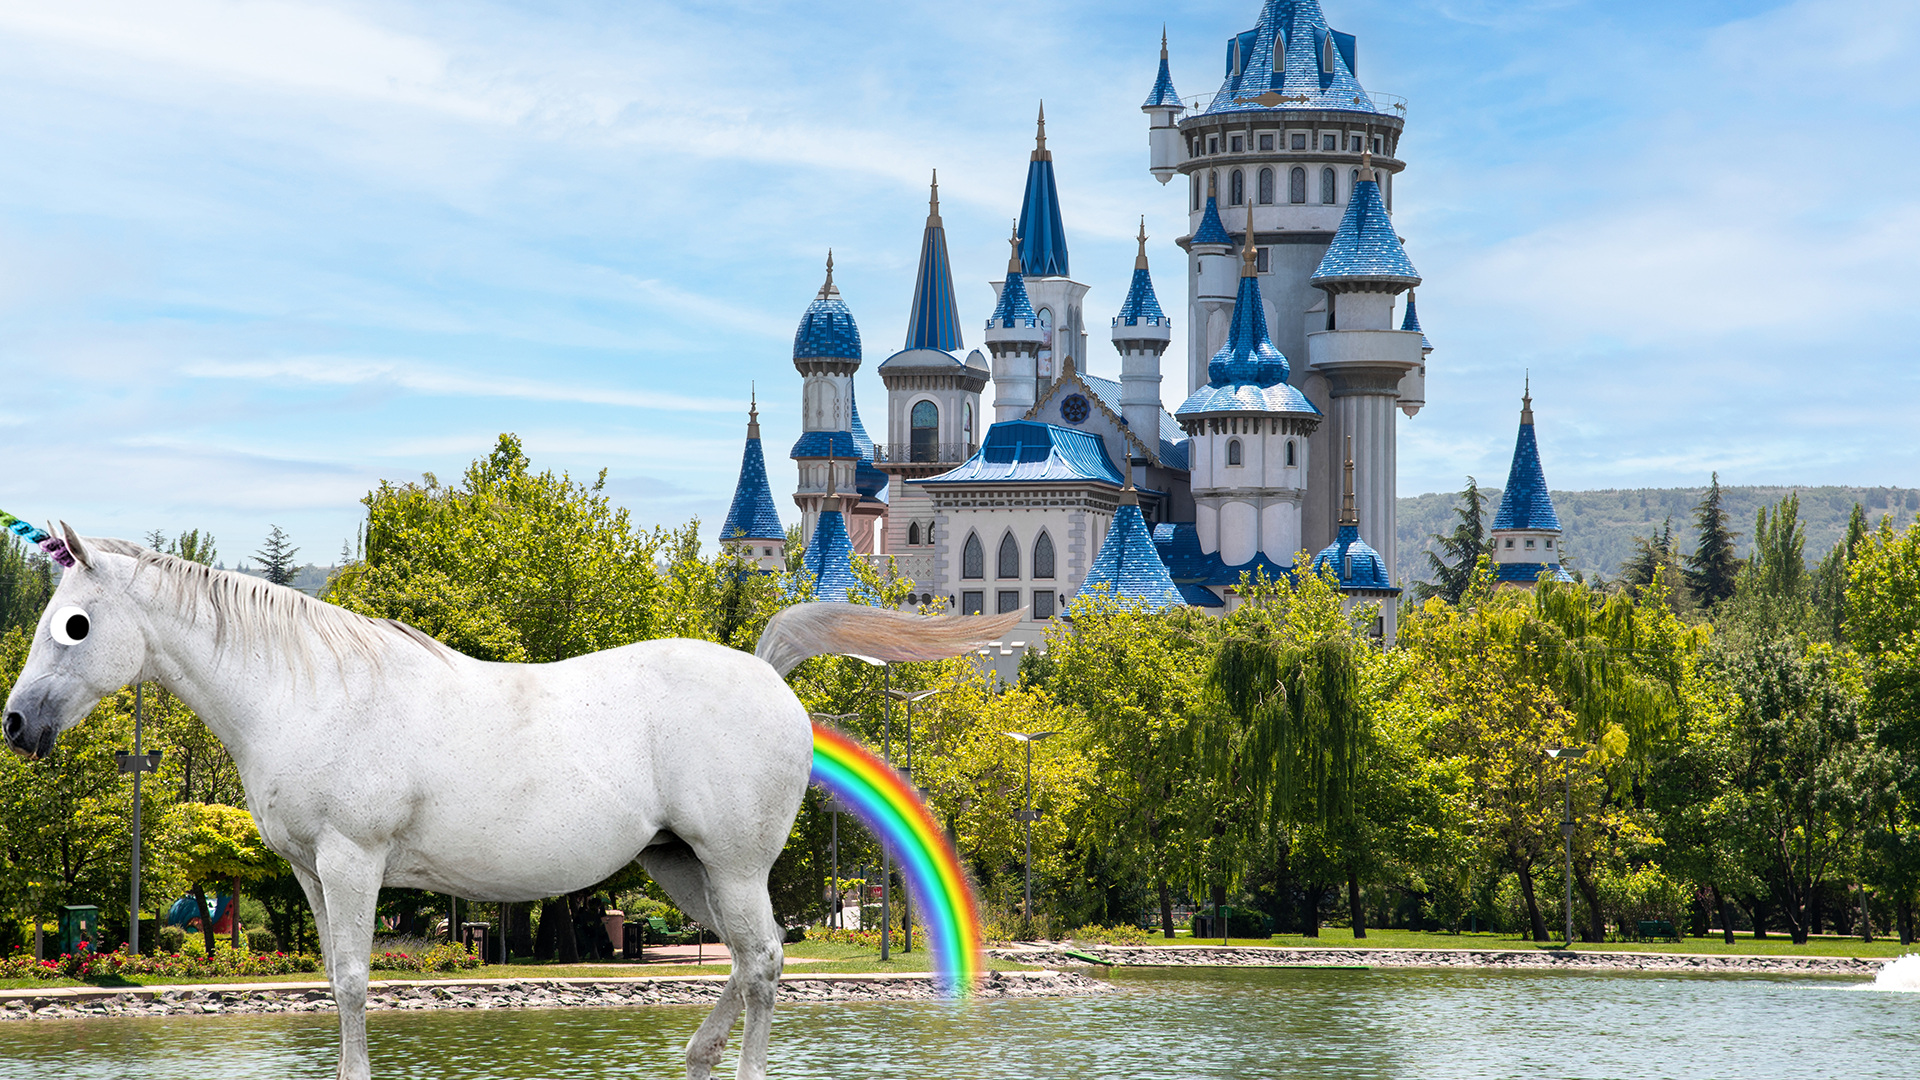 Farting unicorn infront of palace